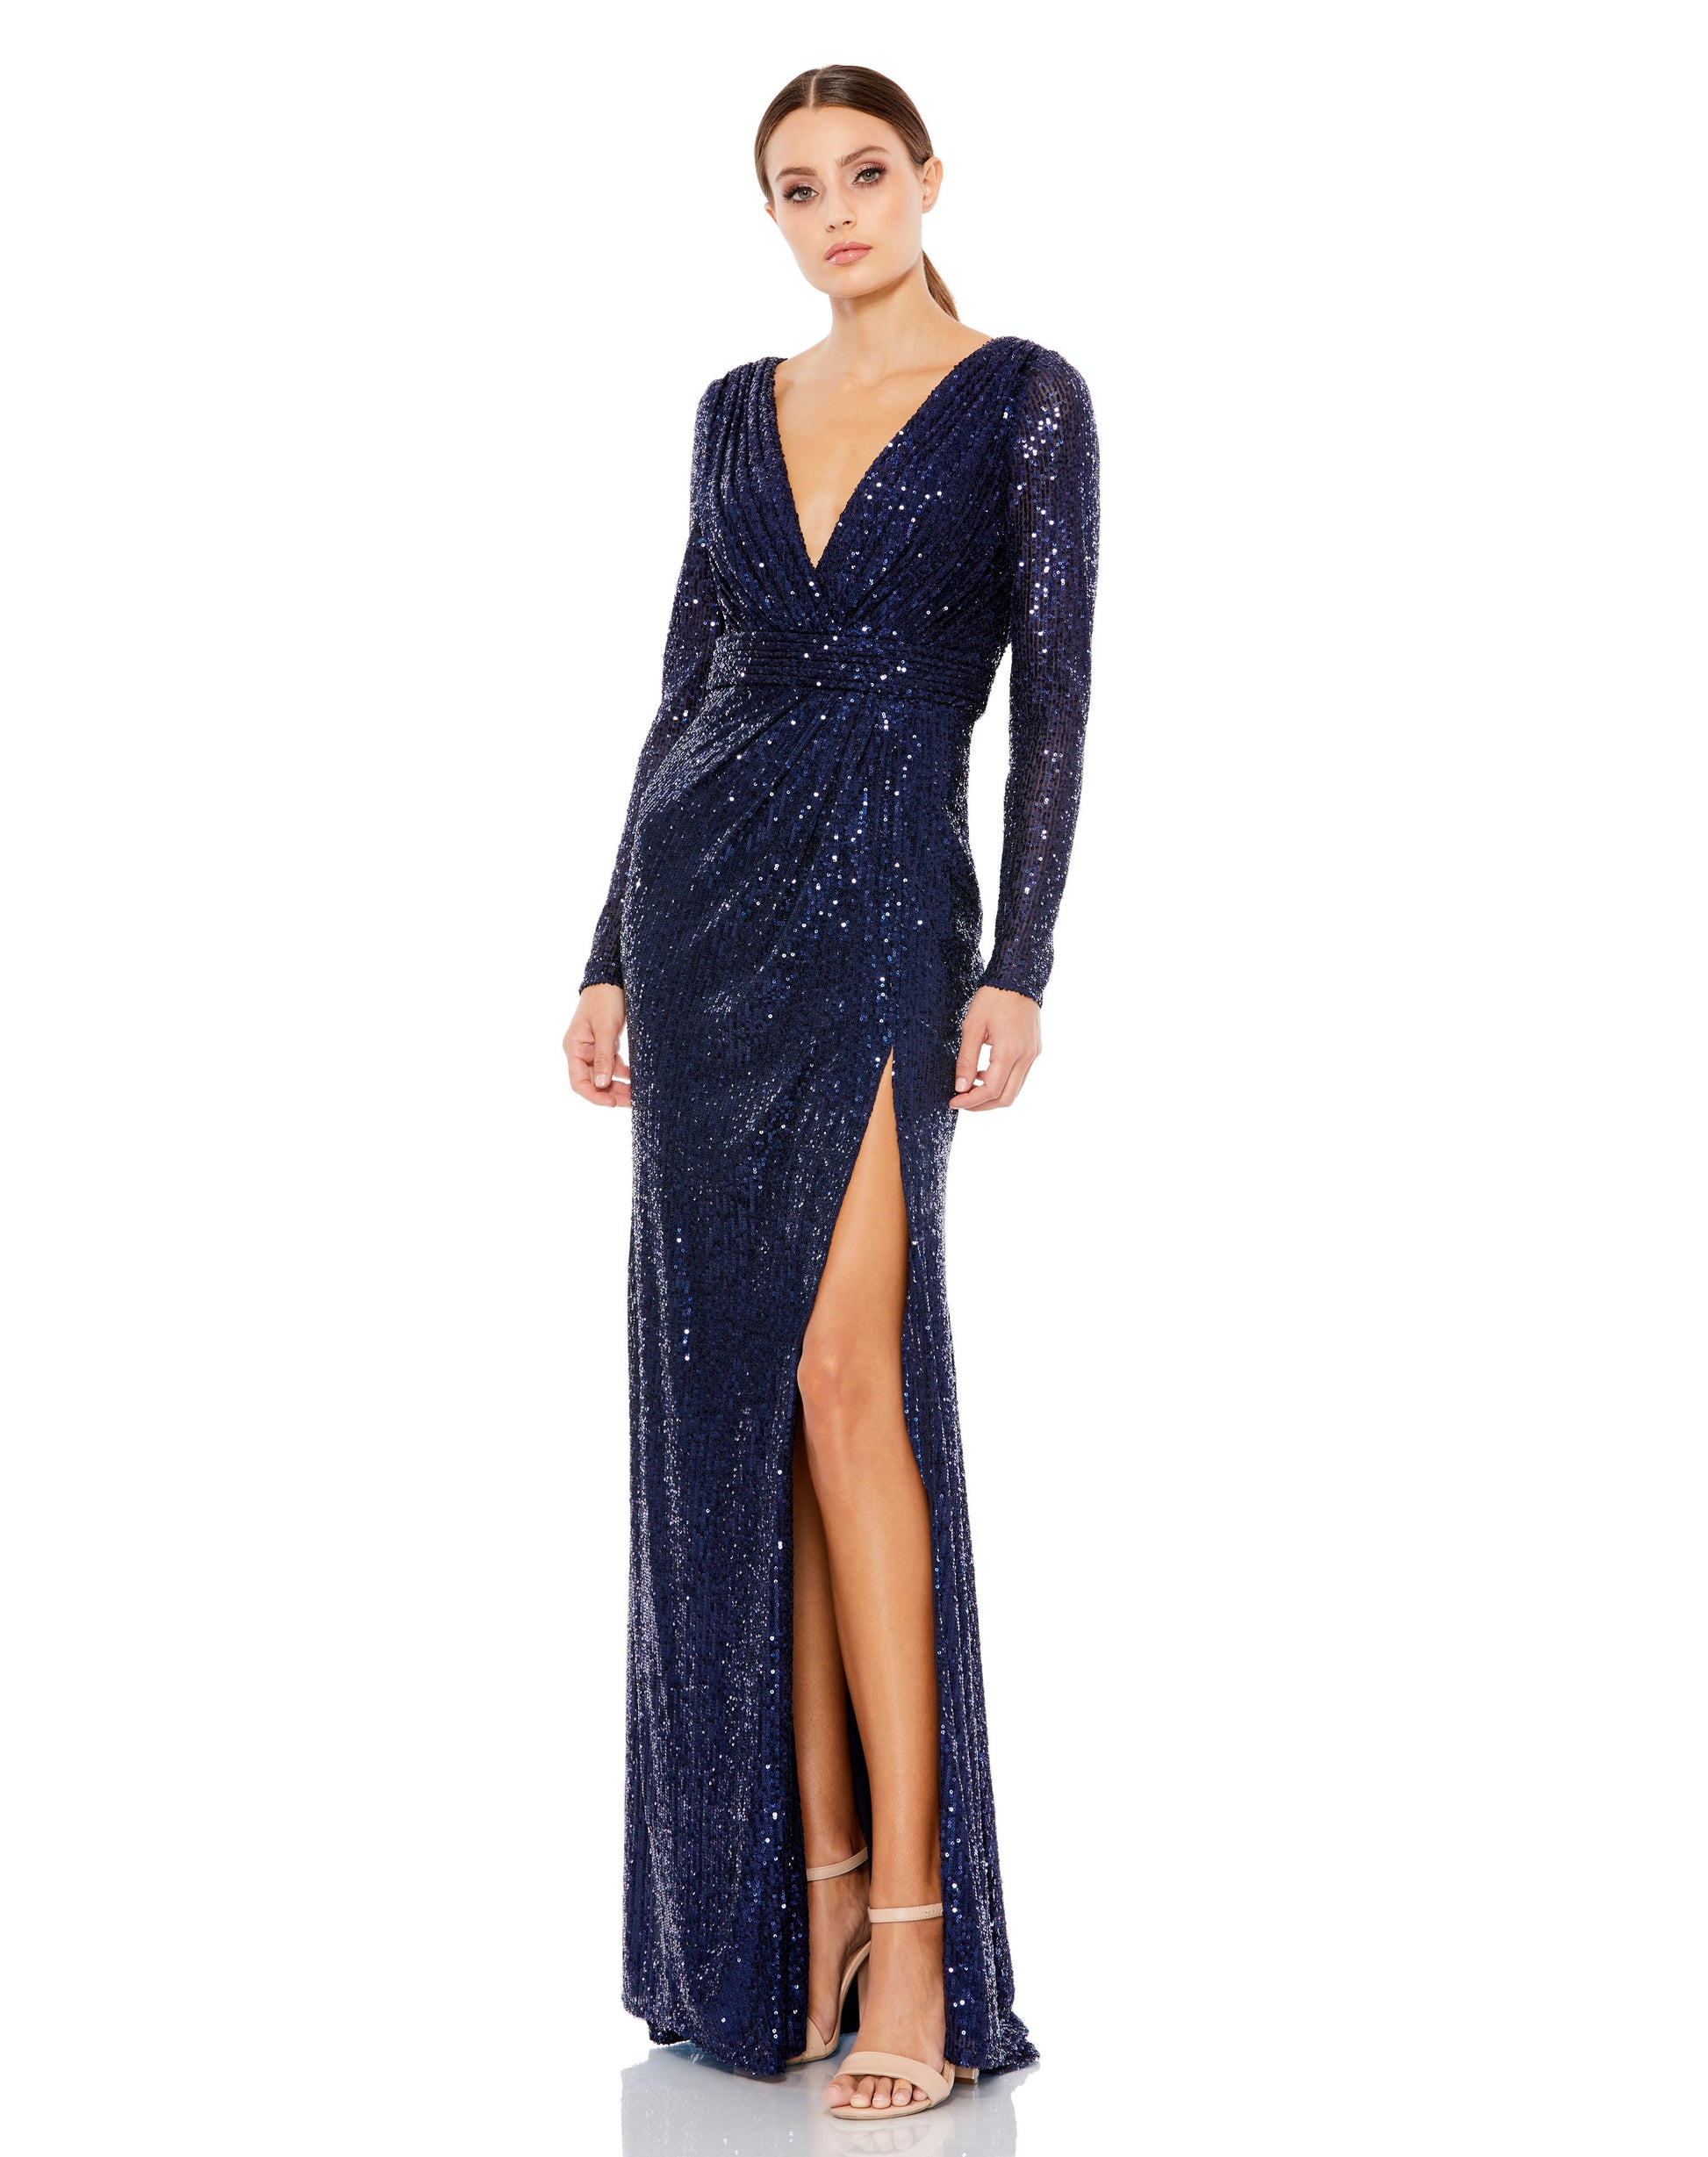 Long sleeved fully sequined evening gown accented with a ruched waist and thigh-high front slit. Ieena for Mac Duggal Fully Lined Back Zipper 100% Polyester Long Sleeve Approx. length from shoulder to hem: 62.5" V-Neck Style #26490